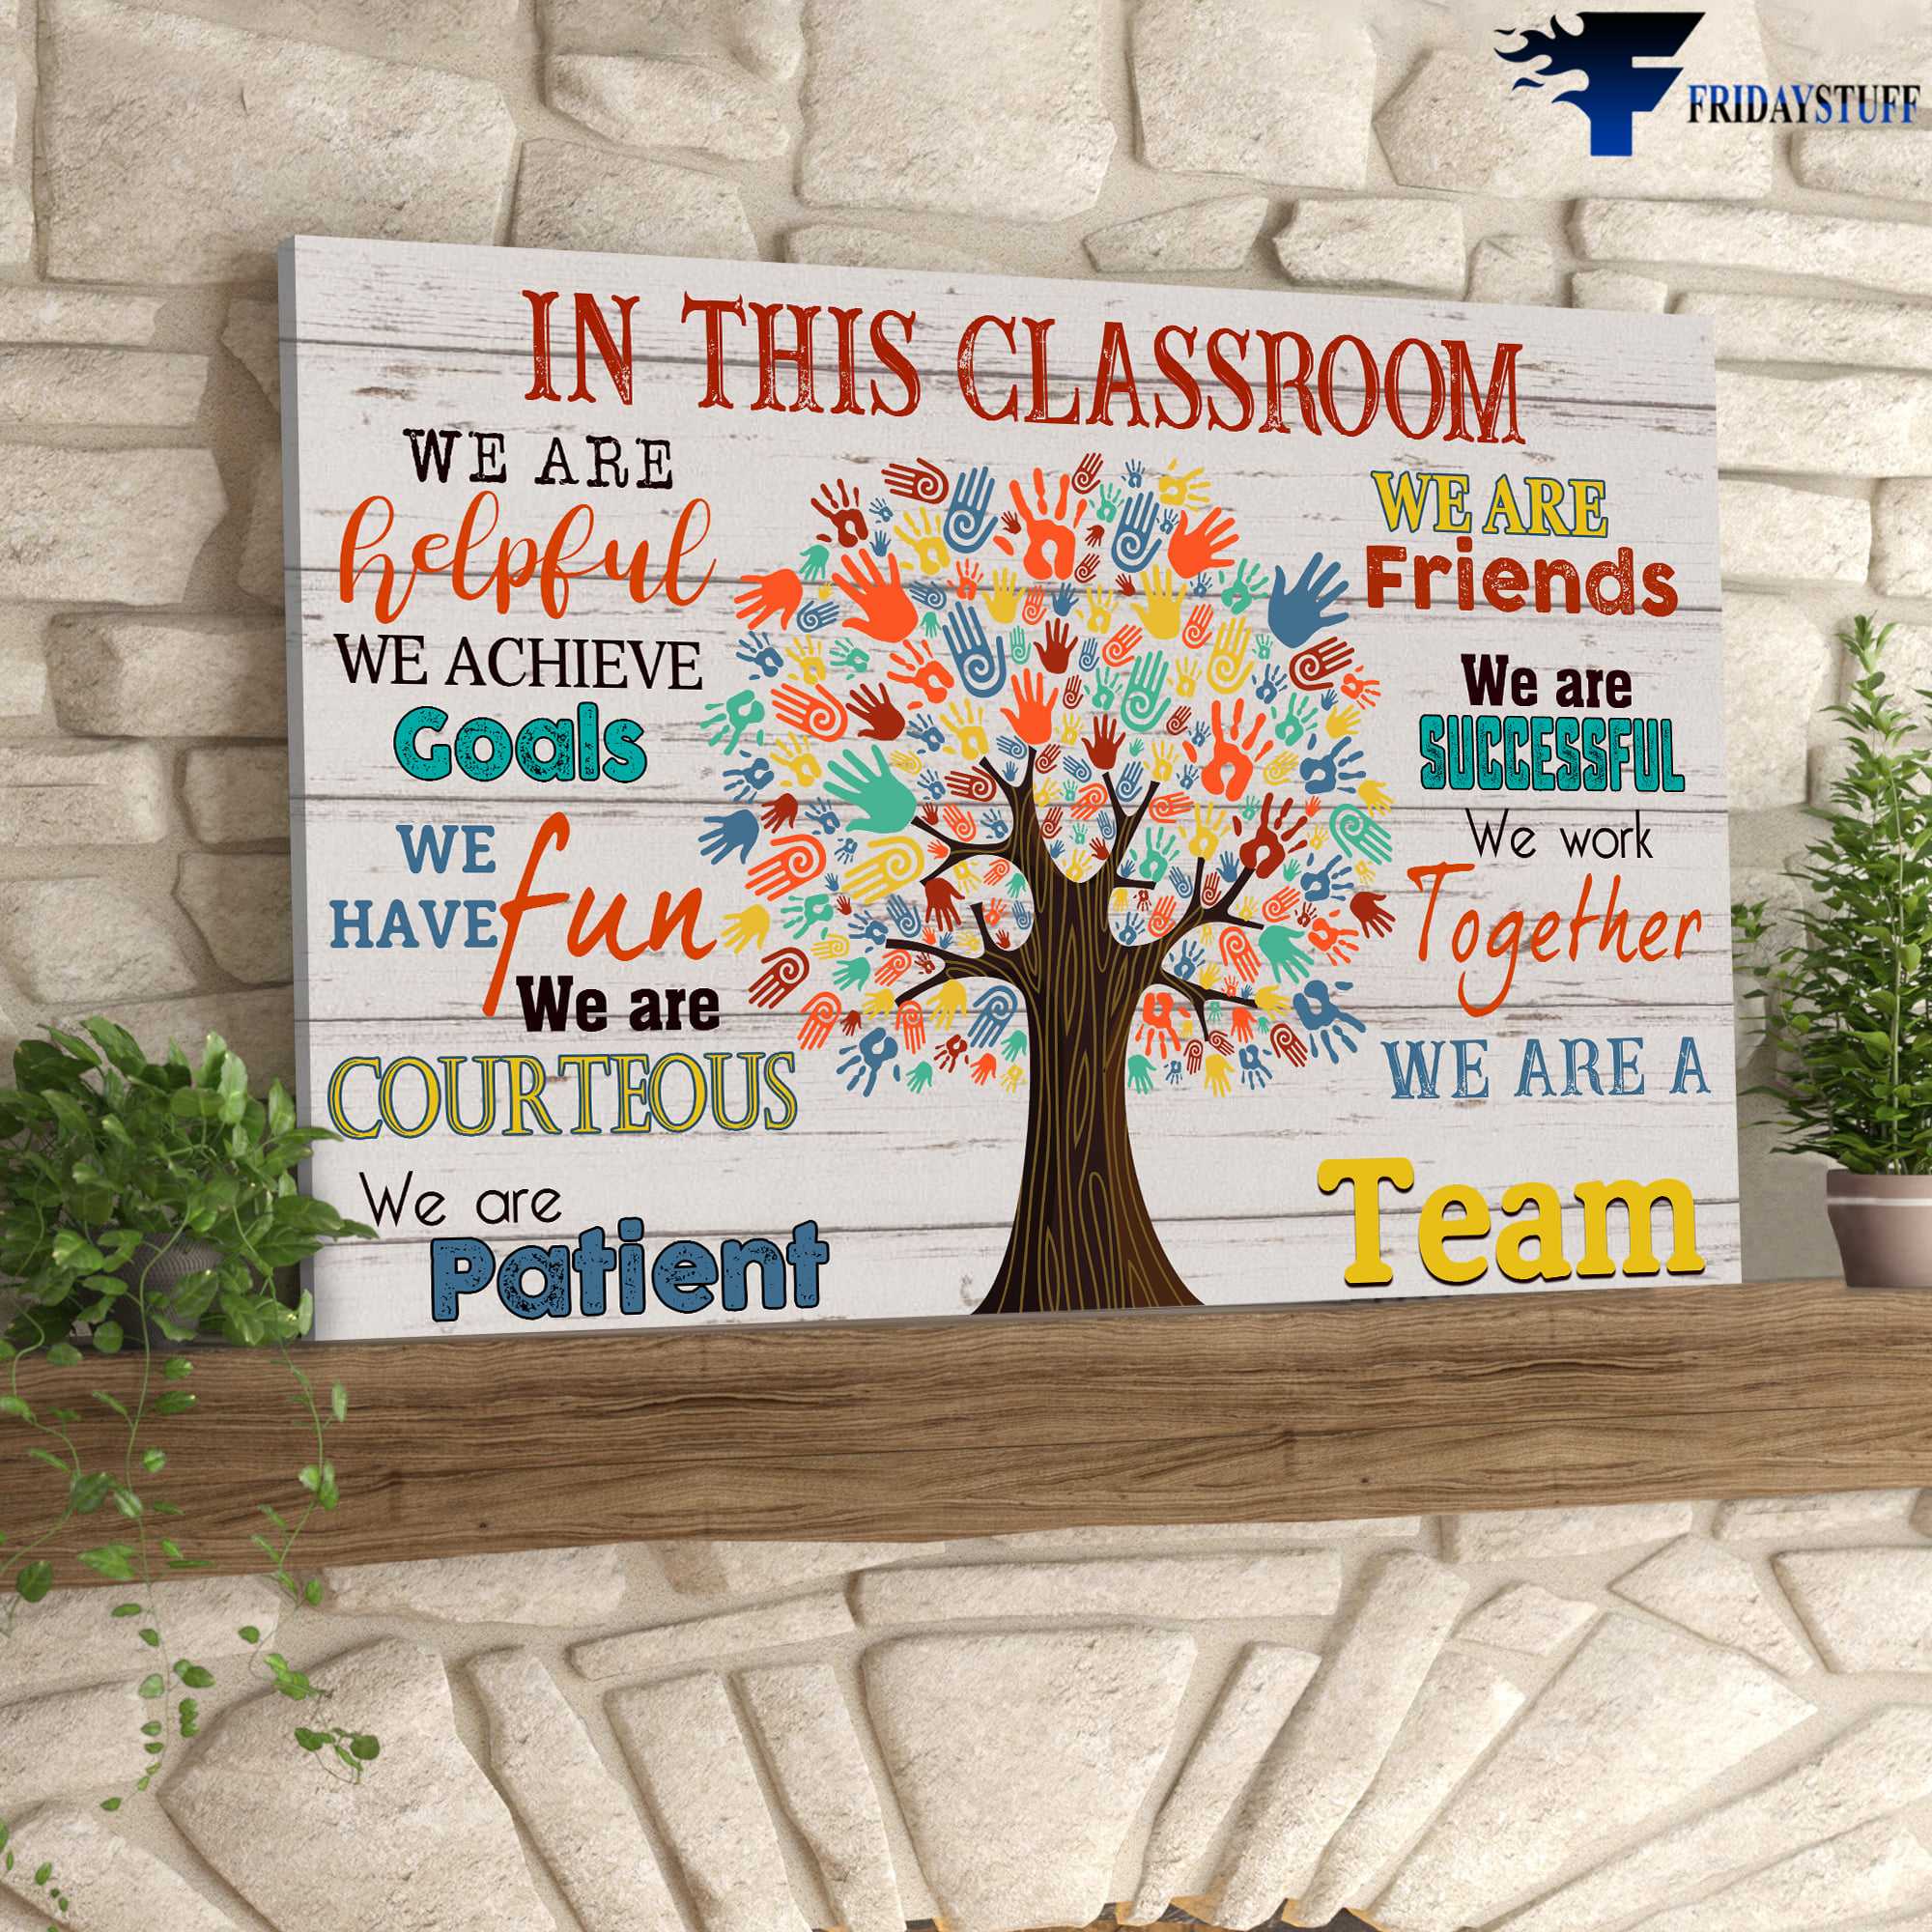 Classroom Poster - We Are Helpful, We Achive Goals, We Have Fun, We Are Courteous, We Are Patient